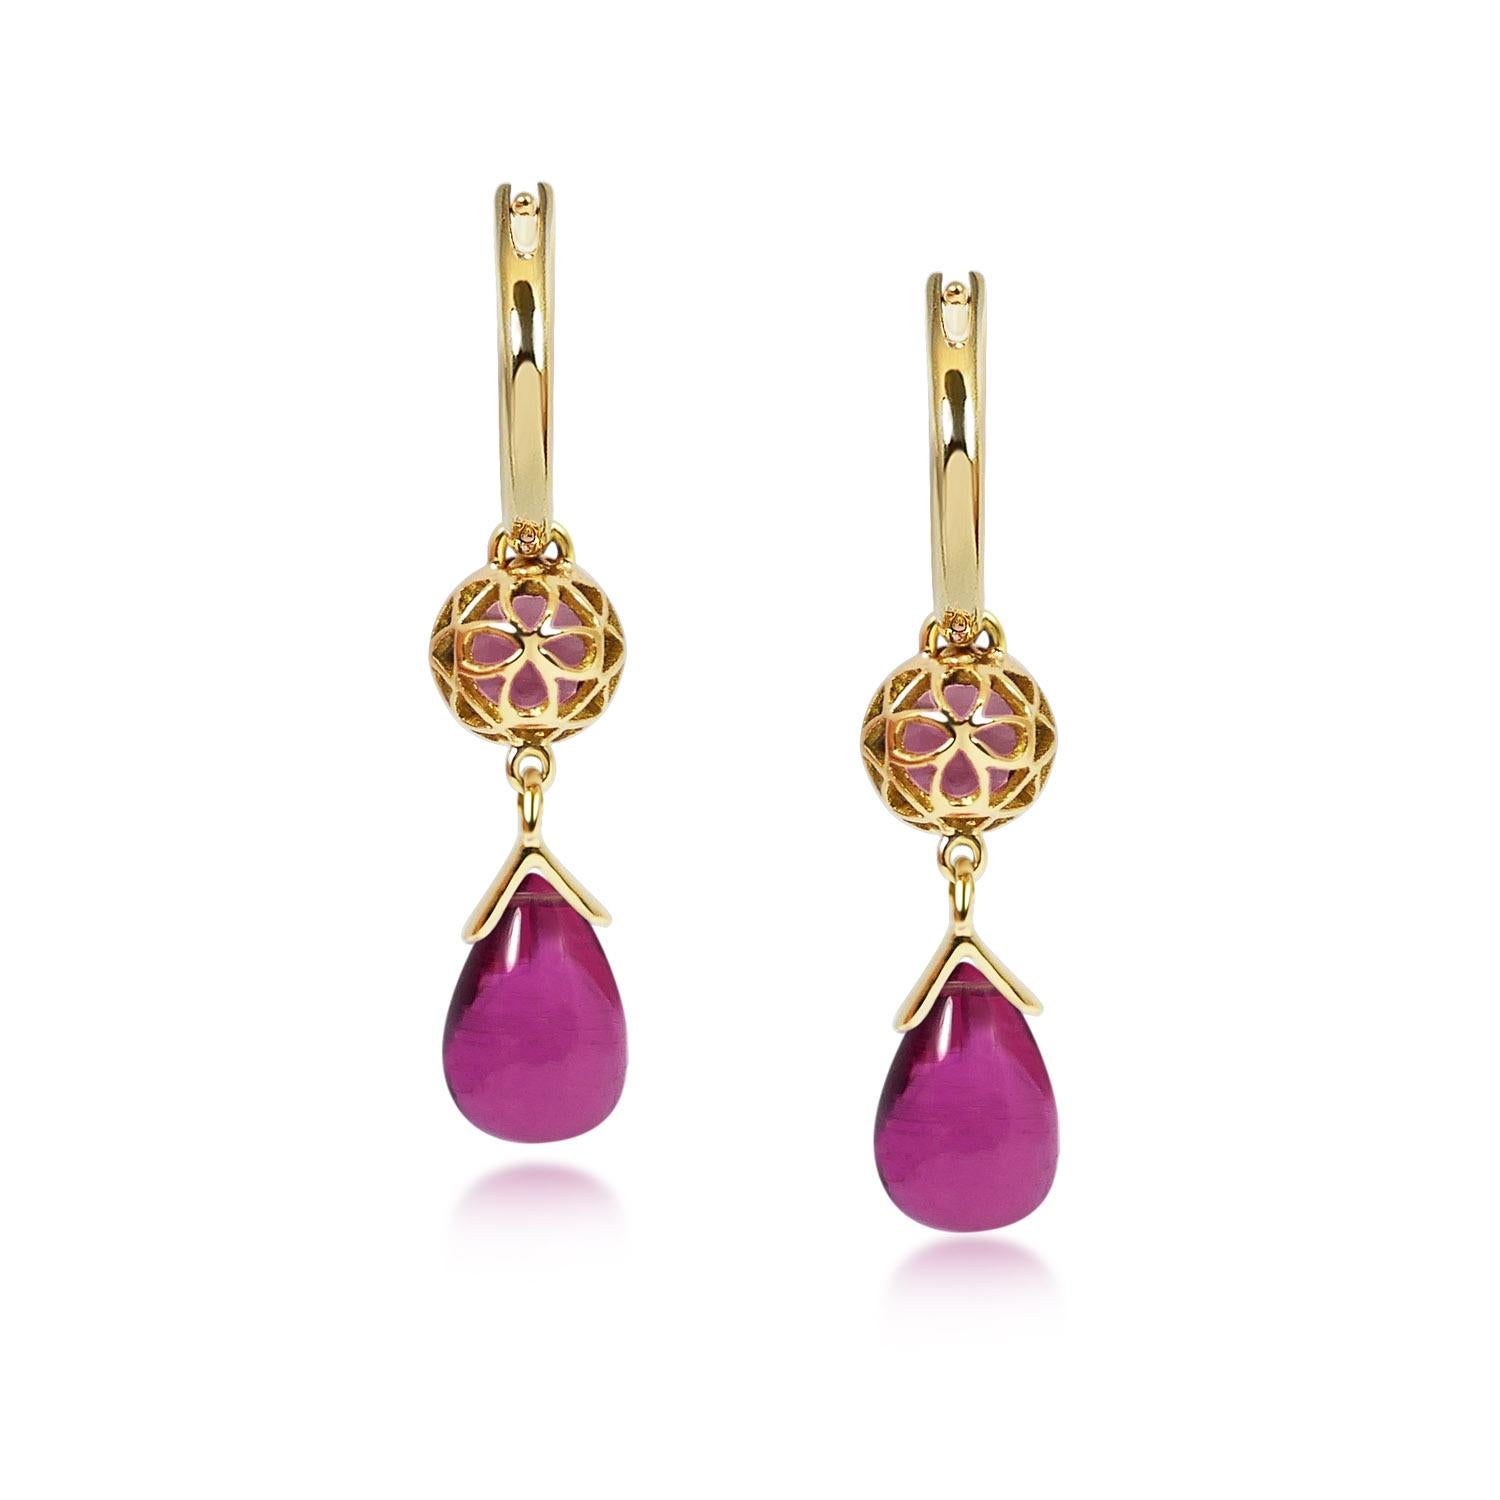 Handcrafted 1.05 & 4.85 Carats Rubelite 18 Karat Yellow Gold Drop Earrings. Dancing drops carved in Rubelite under a set of 6mm round cut Rubelite stones encased in our iconic hand pierced gold lace to let the light through. A diamond has been set